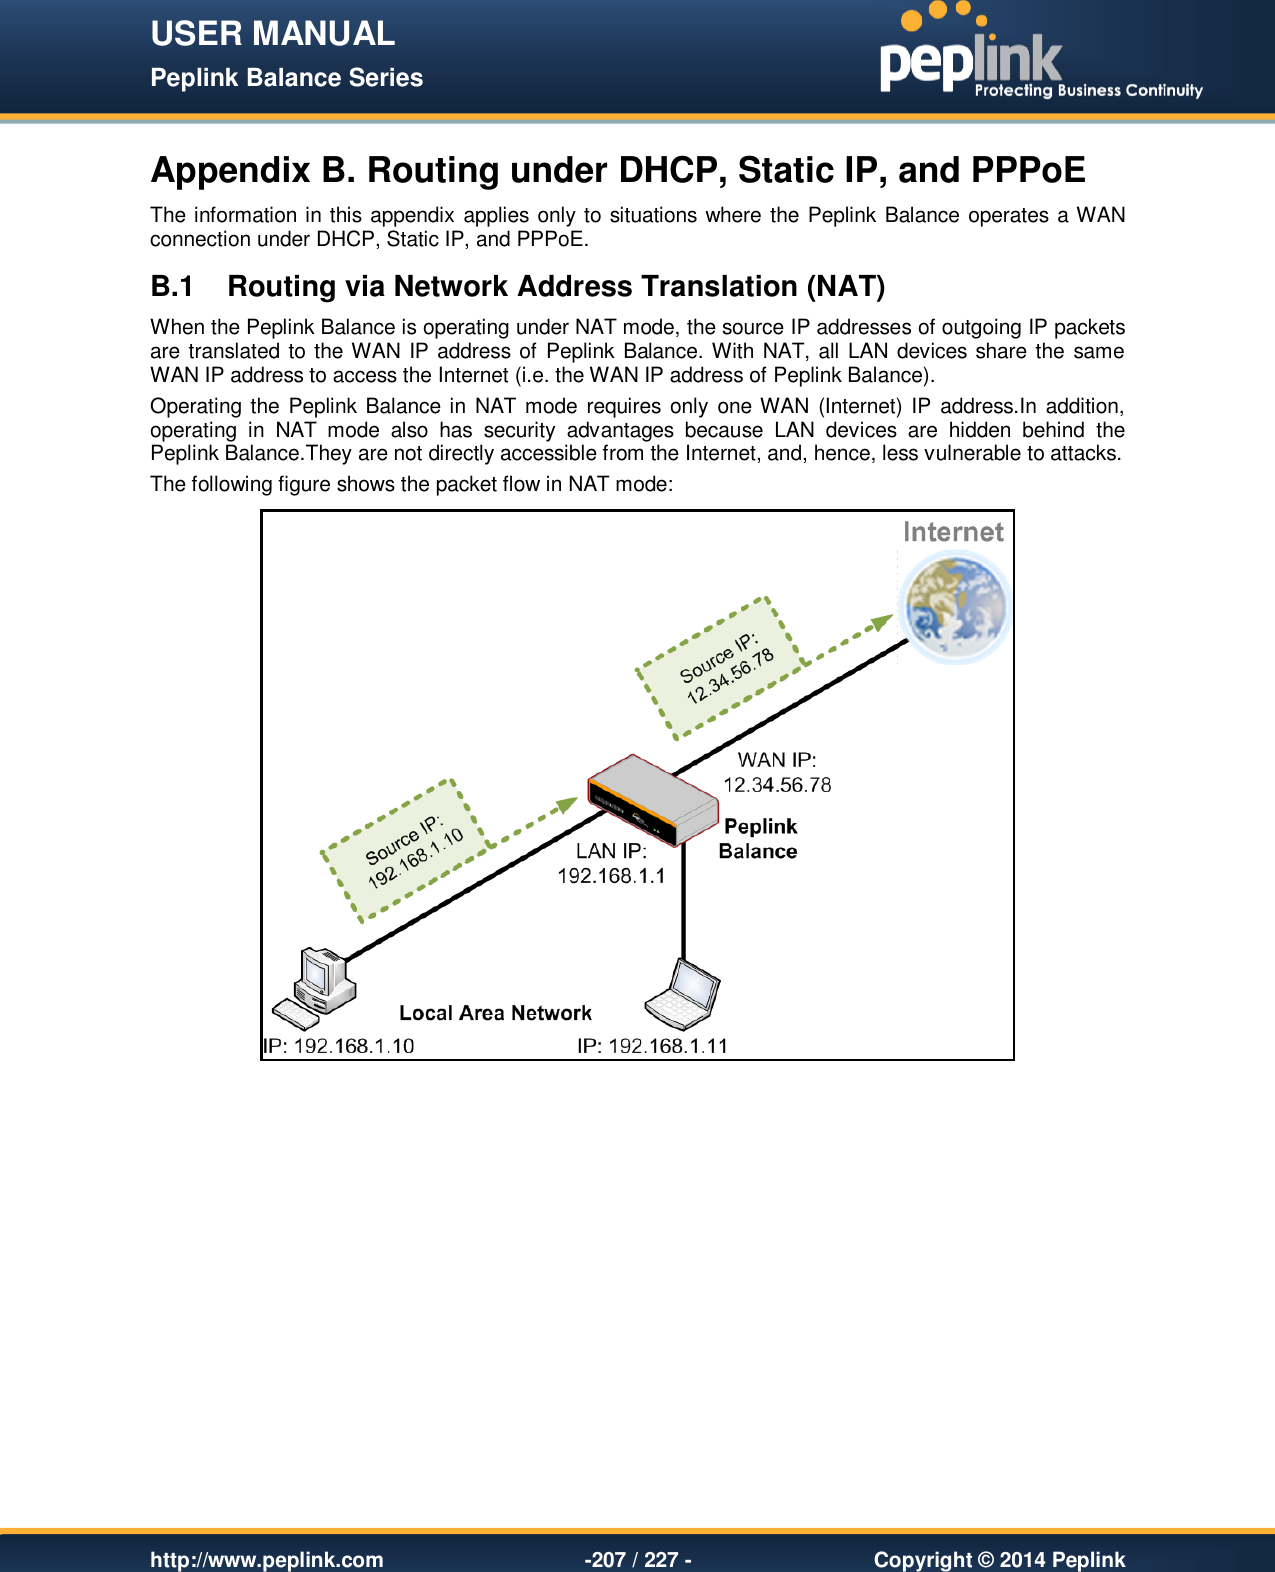 USER MANUAL Peplink Balance Series   http://www.peplink.com -207 / 227 -  Copyright © 2014 Peplink Appendix B. Routing under DHCP, Static IP, and PPPoE The information in this appendix applies only to situations where the Peplink Balance operates a WAN connection under DHCP, Static IP, and PPPoE. B.1  Routing via Network Address Translation (NAT) When the Peplink Balance is operating under NAT mode, the source IP addresses of outgoing IP packets are translated to the WAN IP address of Peplink Balance. With NAT, all LAN devices share the same WAN IP address to access the Internet (i.e. the WAN IP address of Peplink Balance).   Operating the Peplink Balance in  NAT mode requires only  one WAN (Internet) IP  address.In  addition, operating  in  NAT  mode  also  has  security  advantages  because  LAN  devices  are  hidden  behind  the Peplink Balance.They are not directly accessible from the Internet, and, hence, less vulnerable to attacks. The following figure shows the packet flow in NAT mode:     